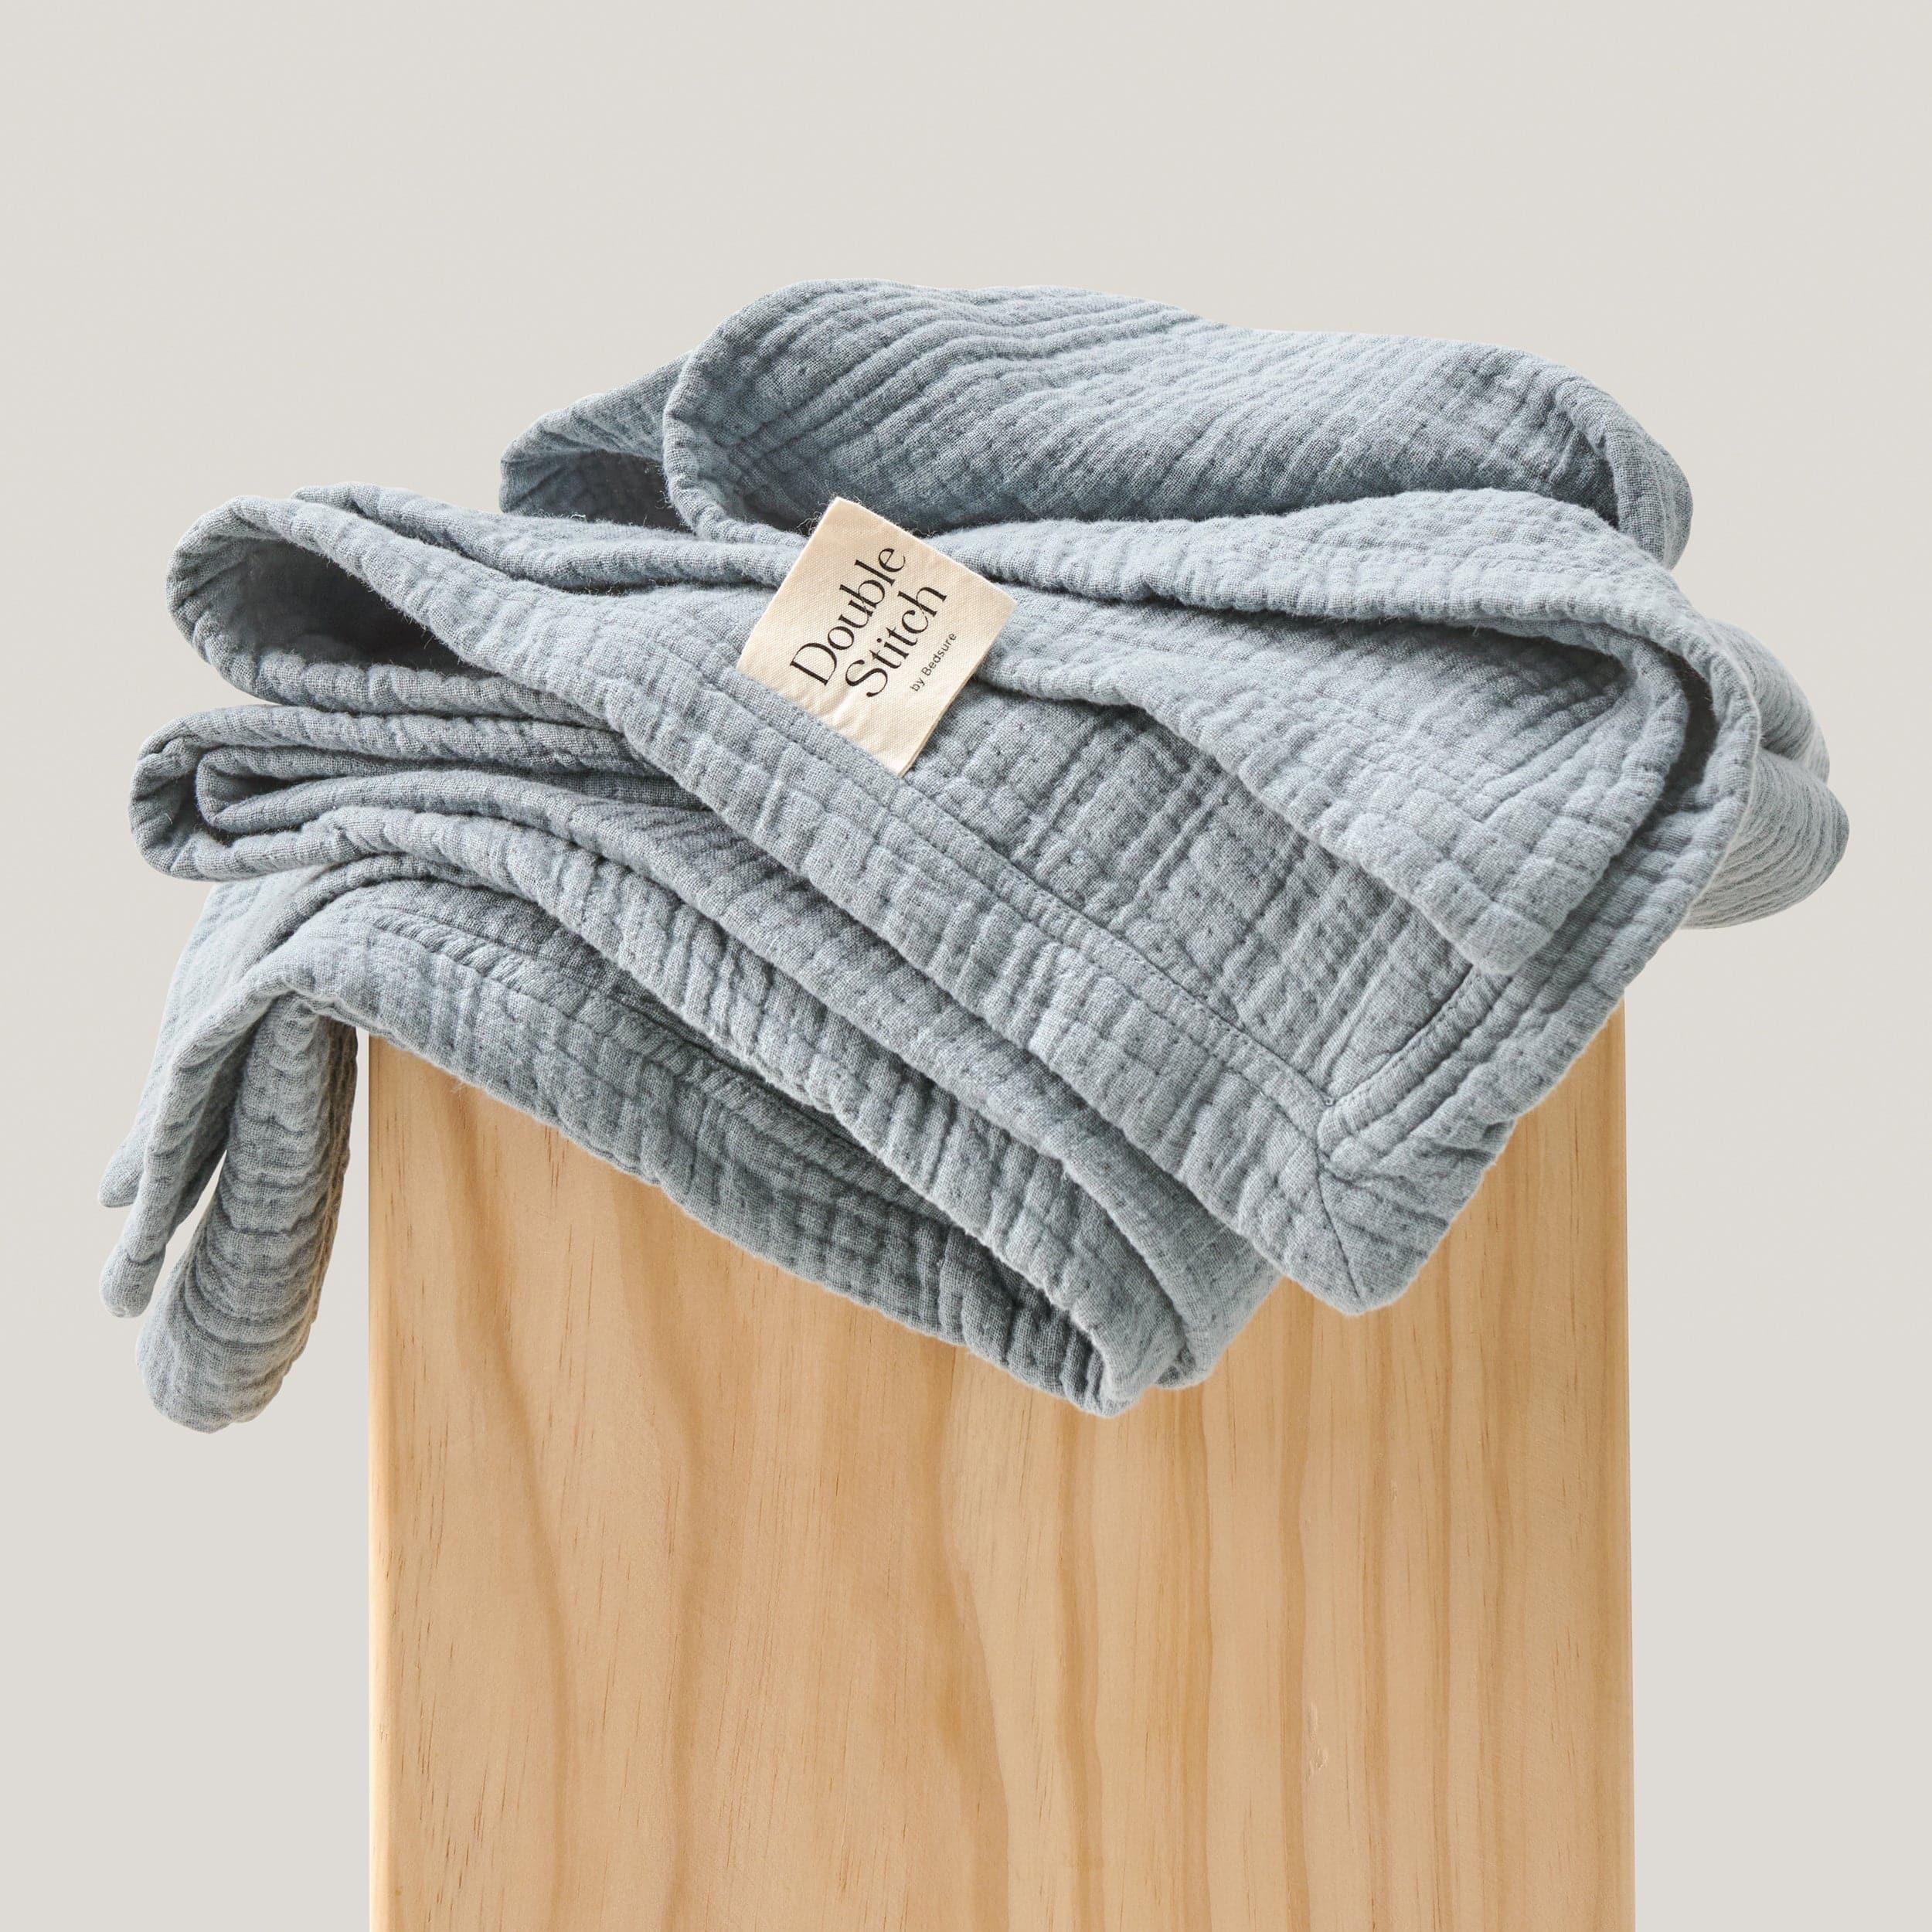 The soft texture of the knit throw blanket makes it perfect for cuddling up with a good book.